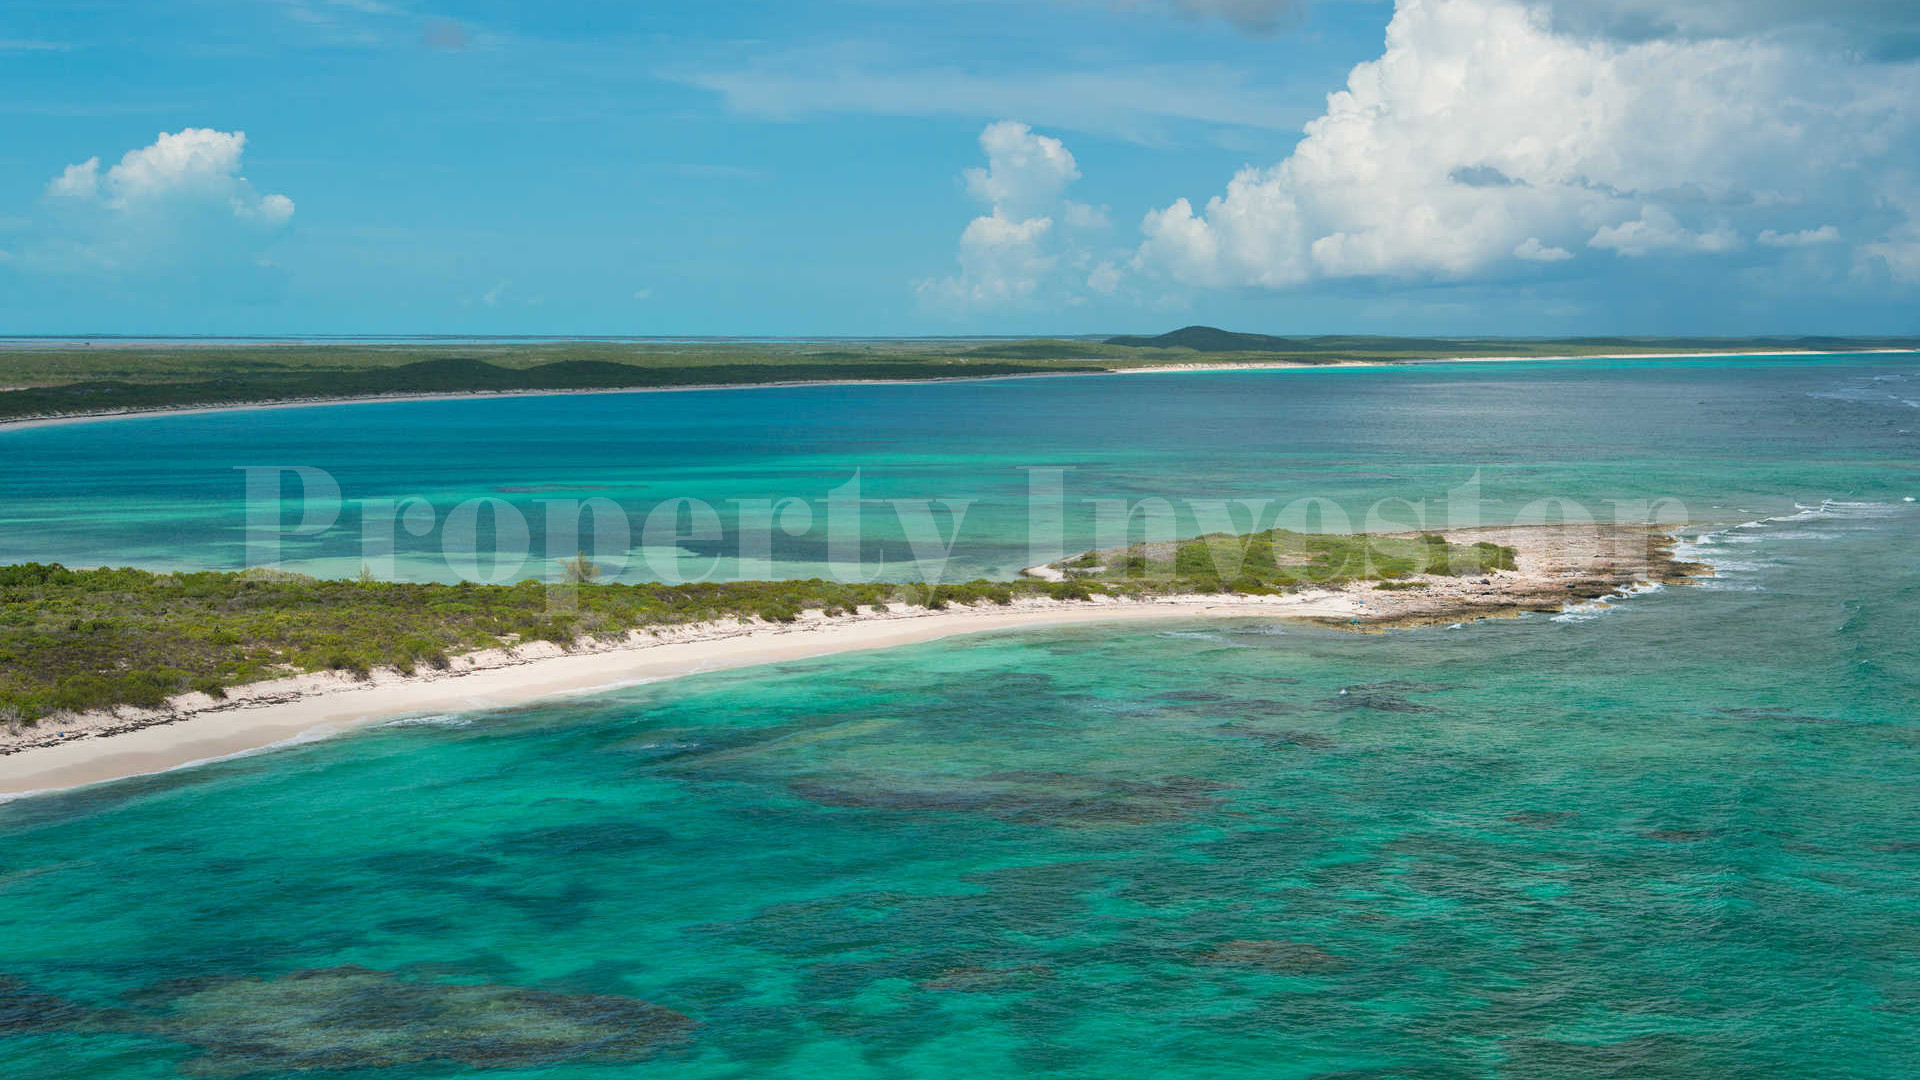 Second Large 215 Hectare Lot for Commercial Development in East Caicos (Lot 1B)